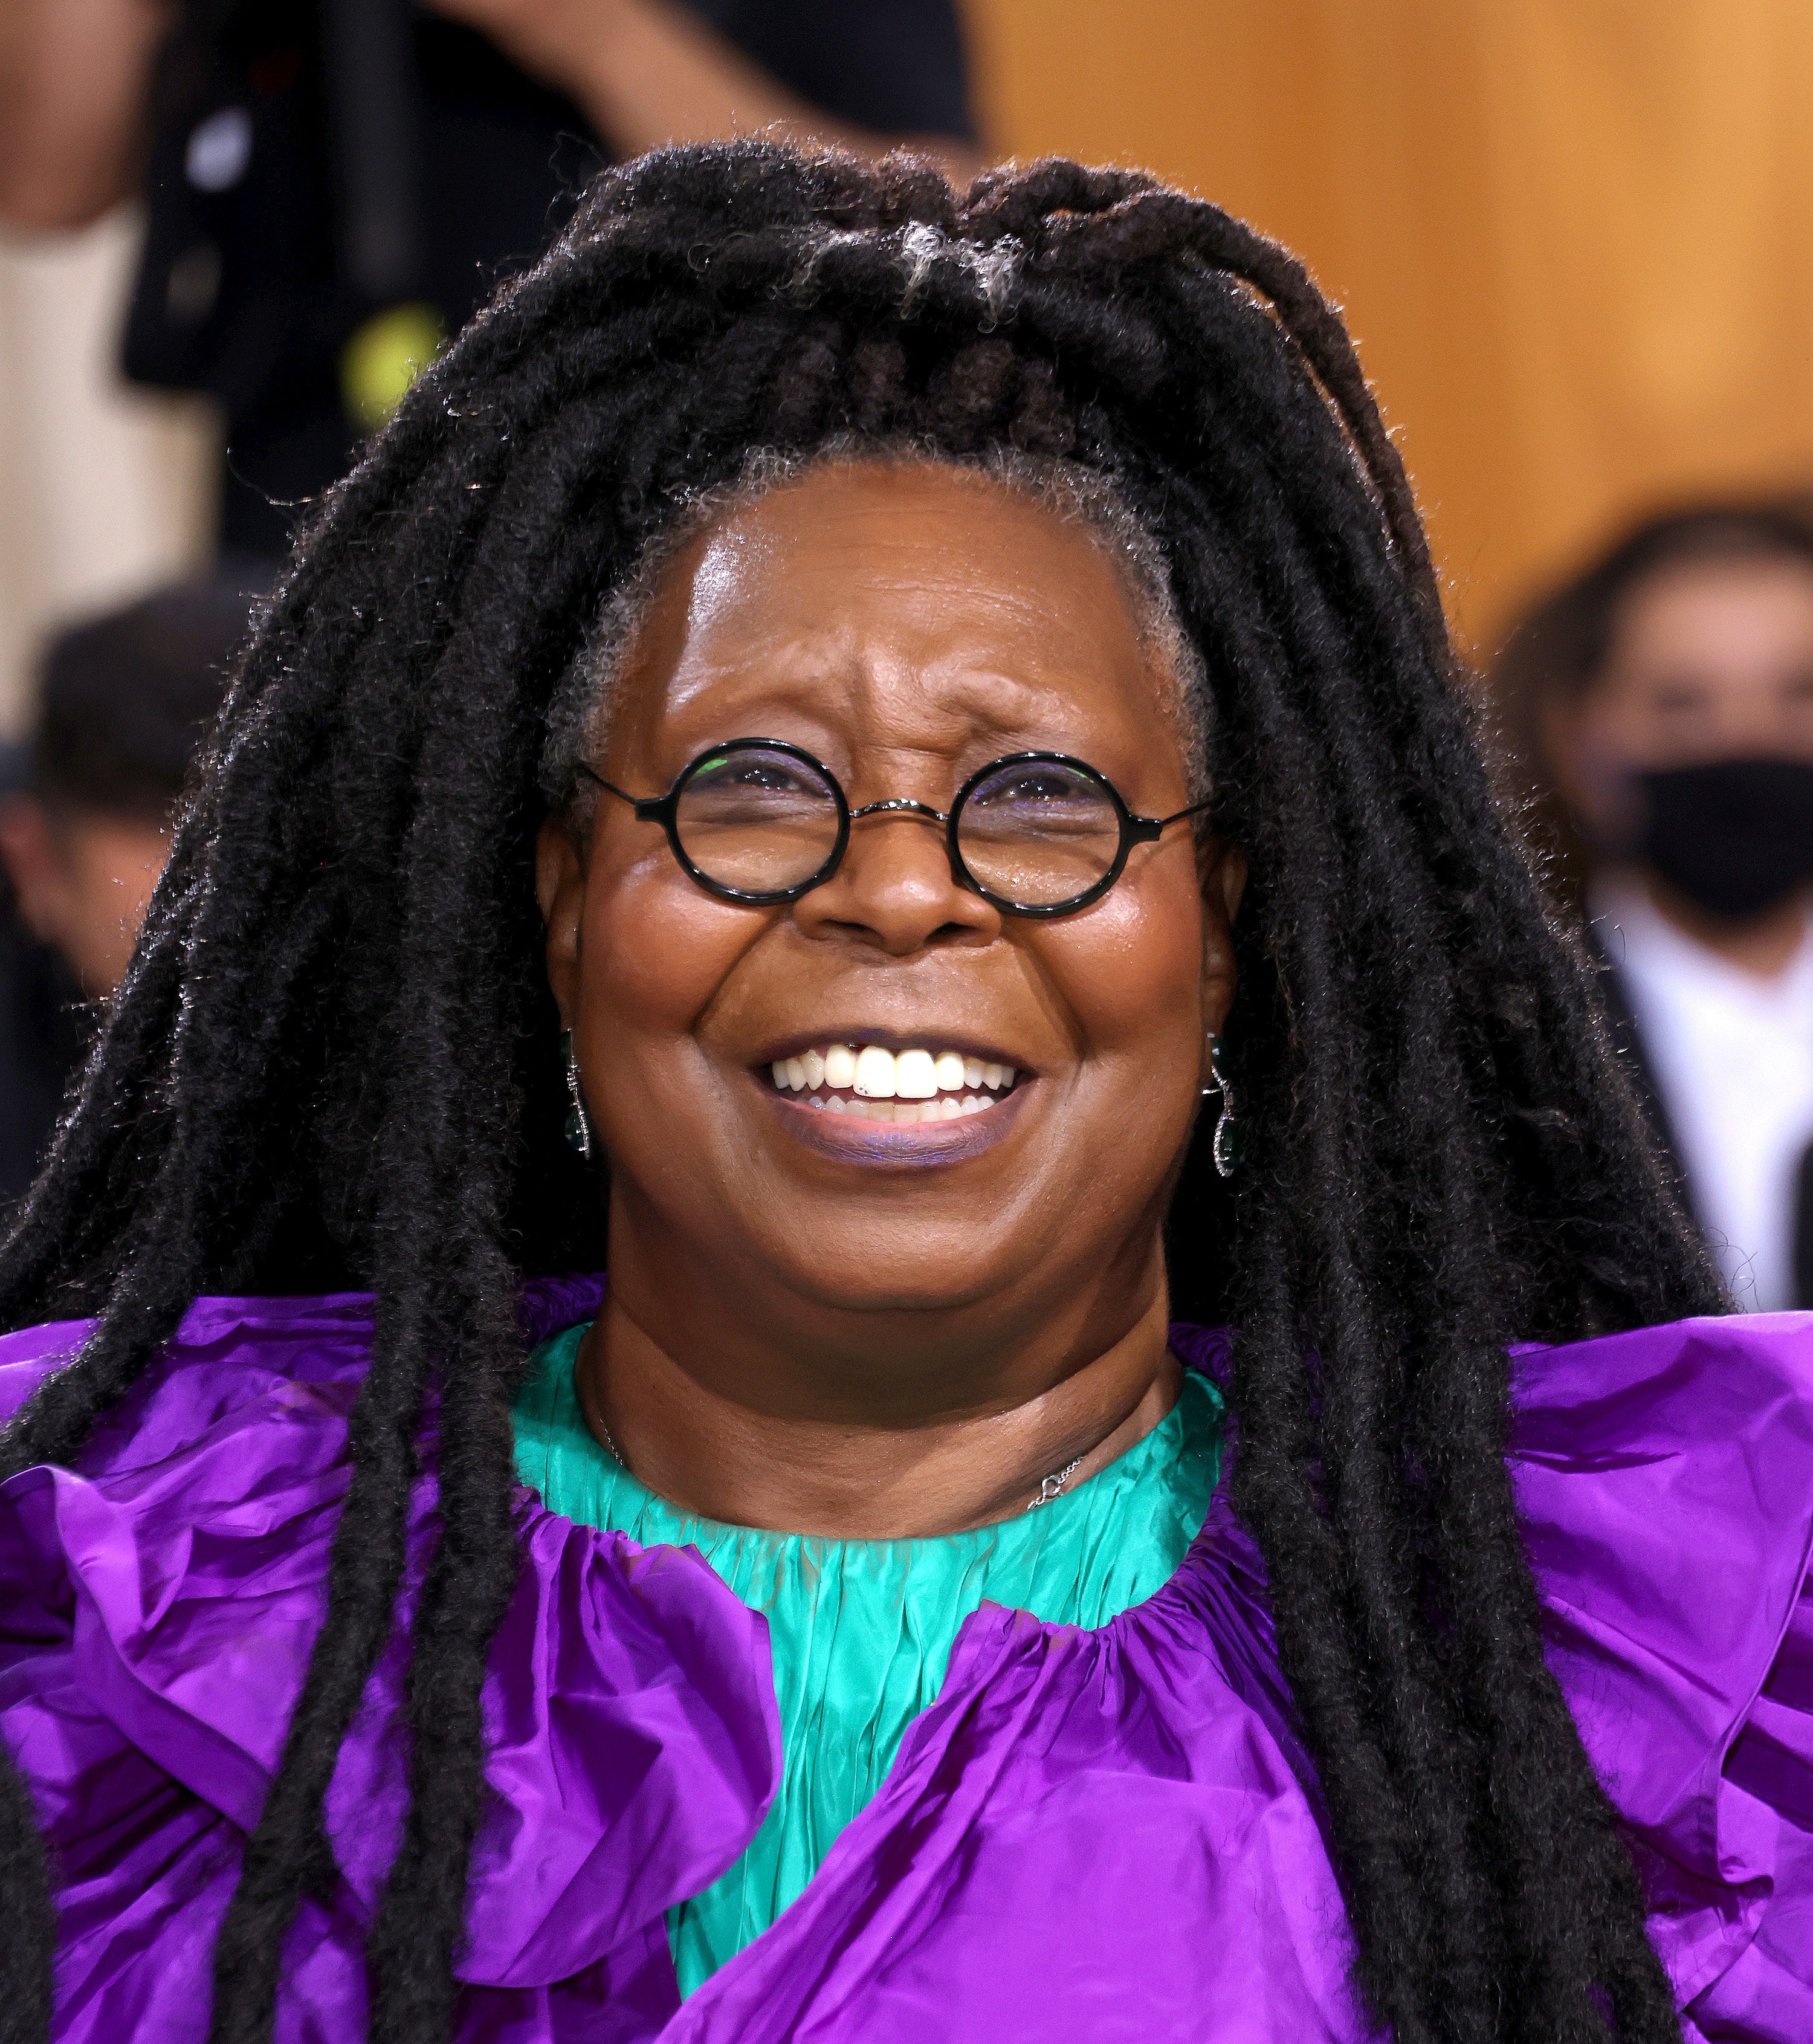 Whoopi Goldberg attends The 2021 Met Gala Celebrating In America: A Lexicon Of Fashion at Metropolitan Museum of Art on September 13, 2021